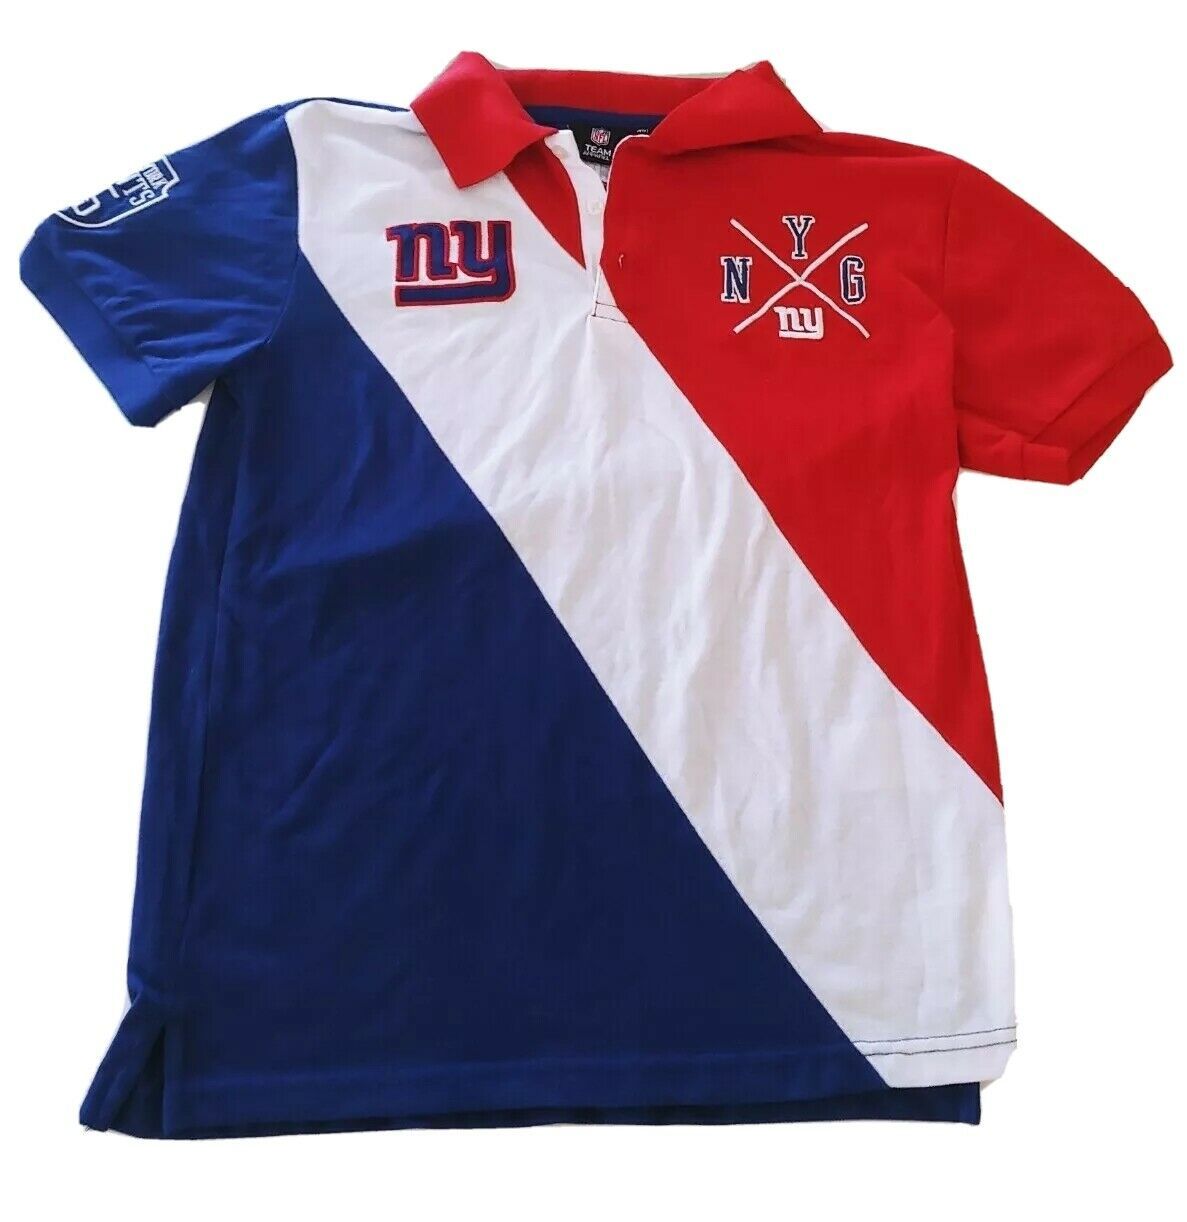 Primary image for New York Giants NFL Men's Diagonal Stripe Polo Embroidered Shirt Size: Medium